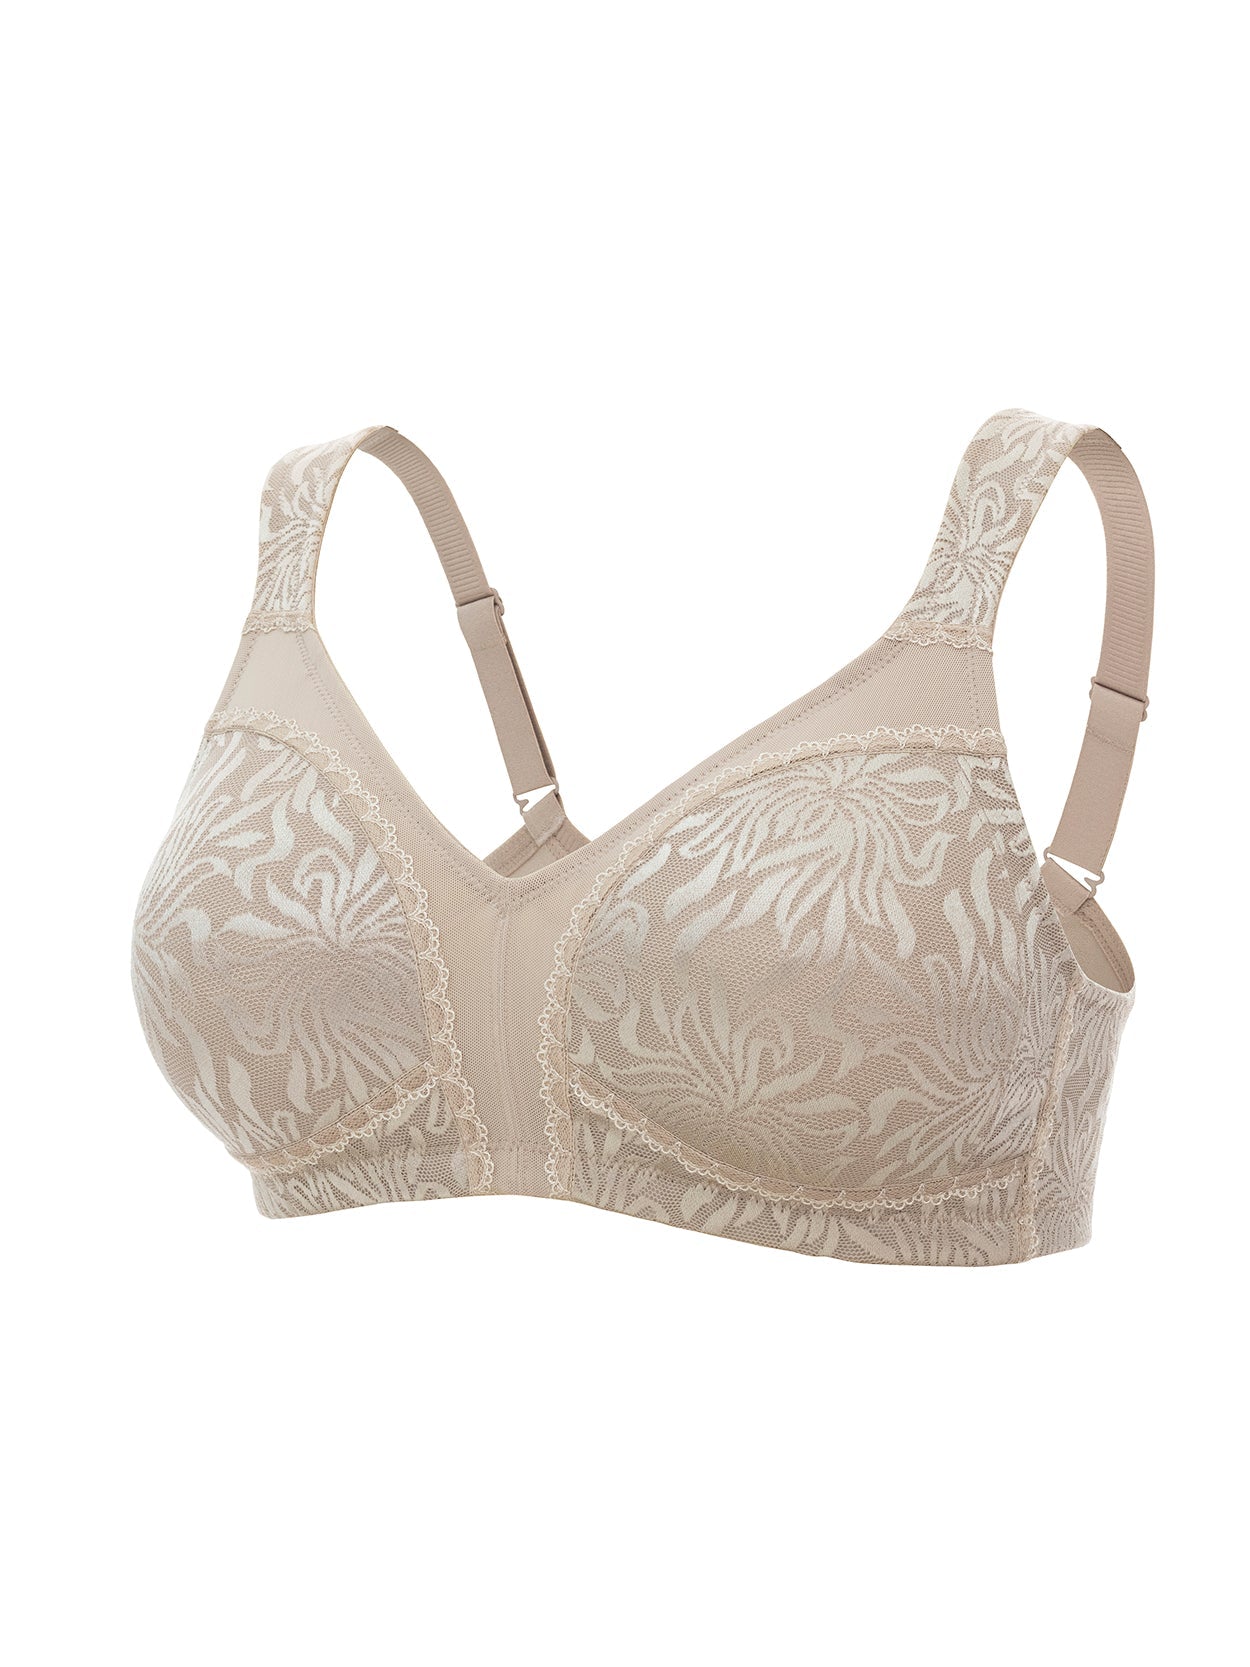 What is the difference between padded bras and non-padded bras? Why do –  WingsLove